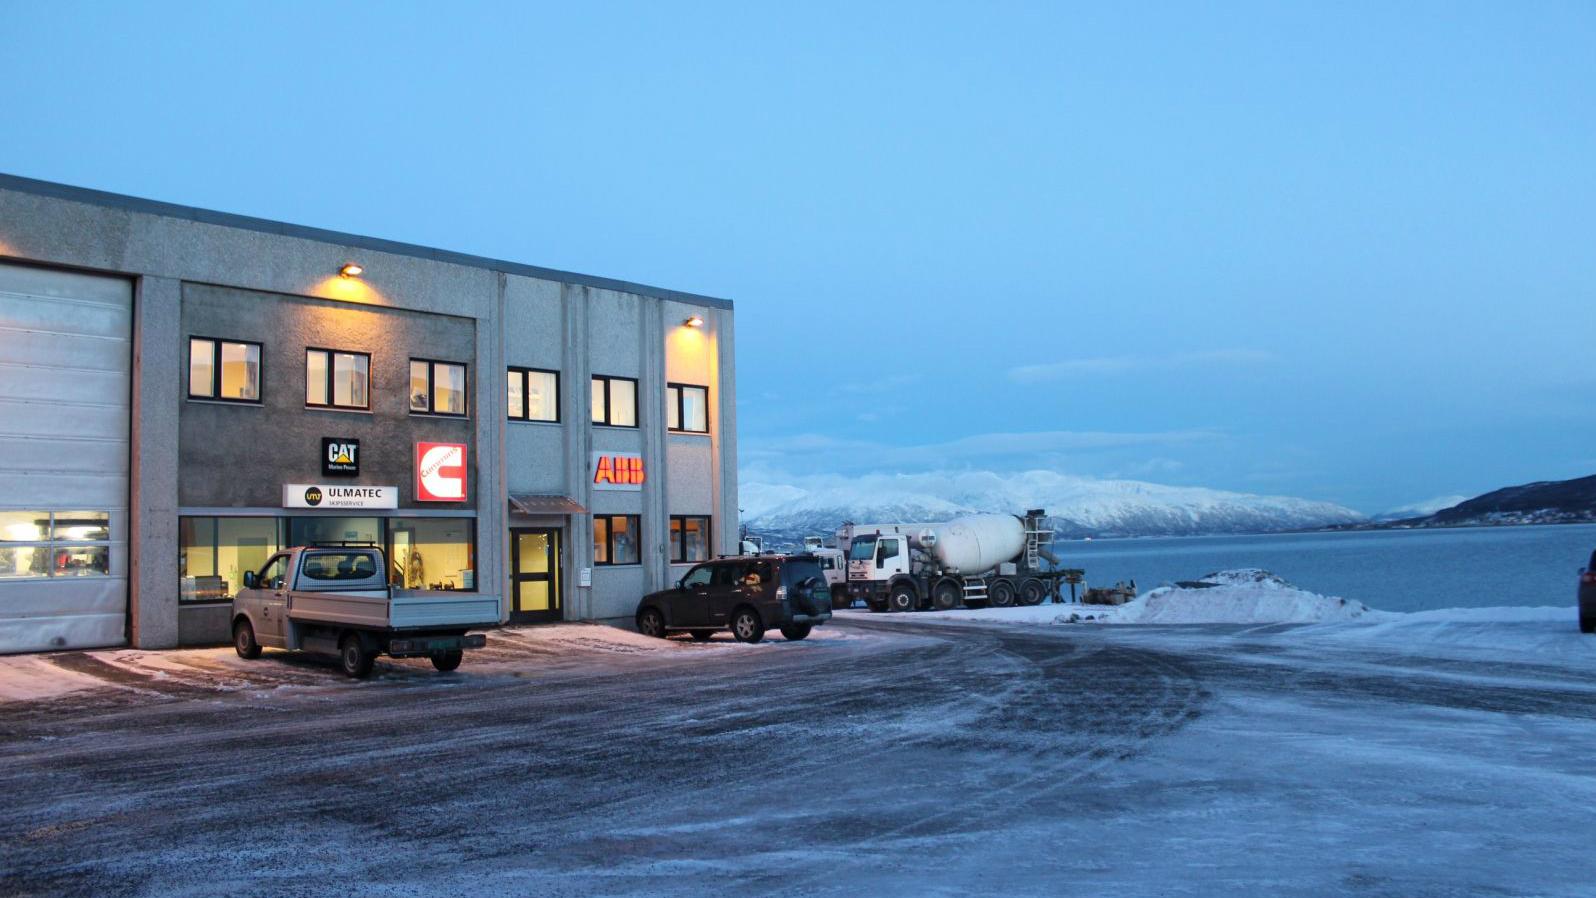 ABB Turbocharging's New Service Point in Norway